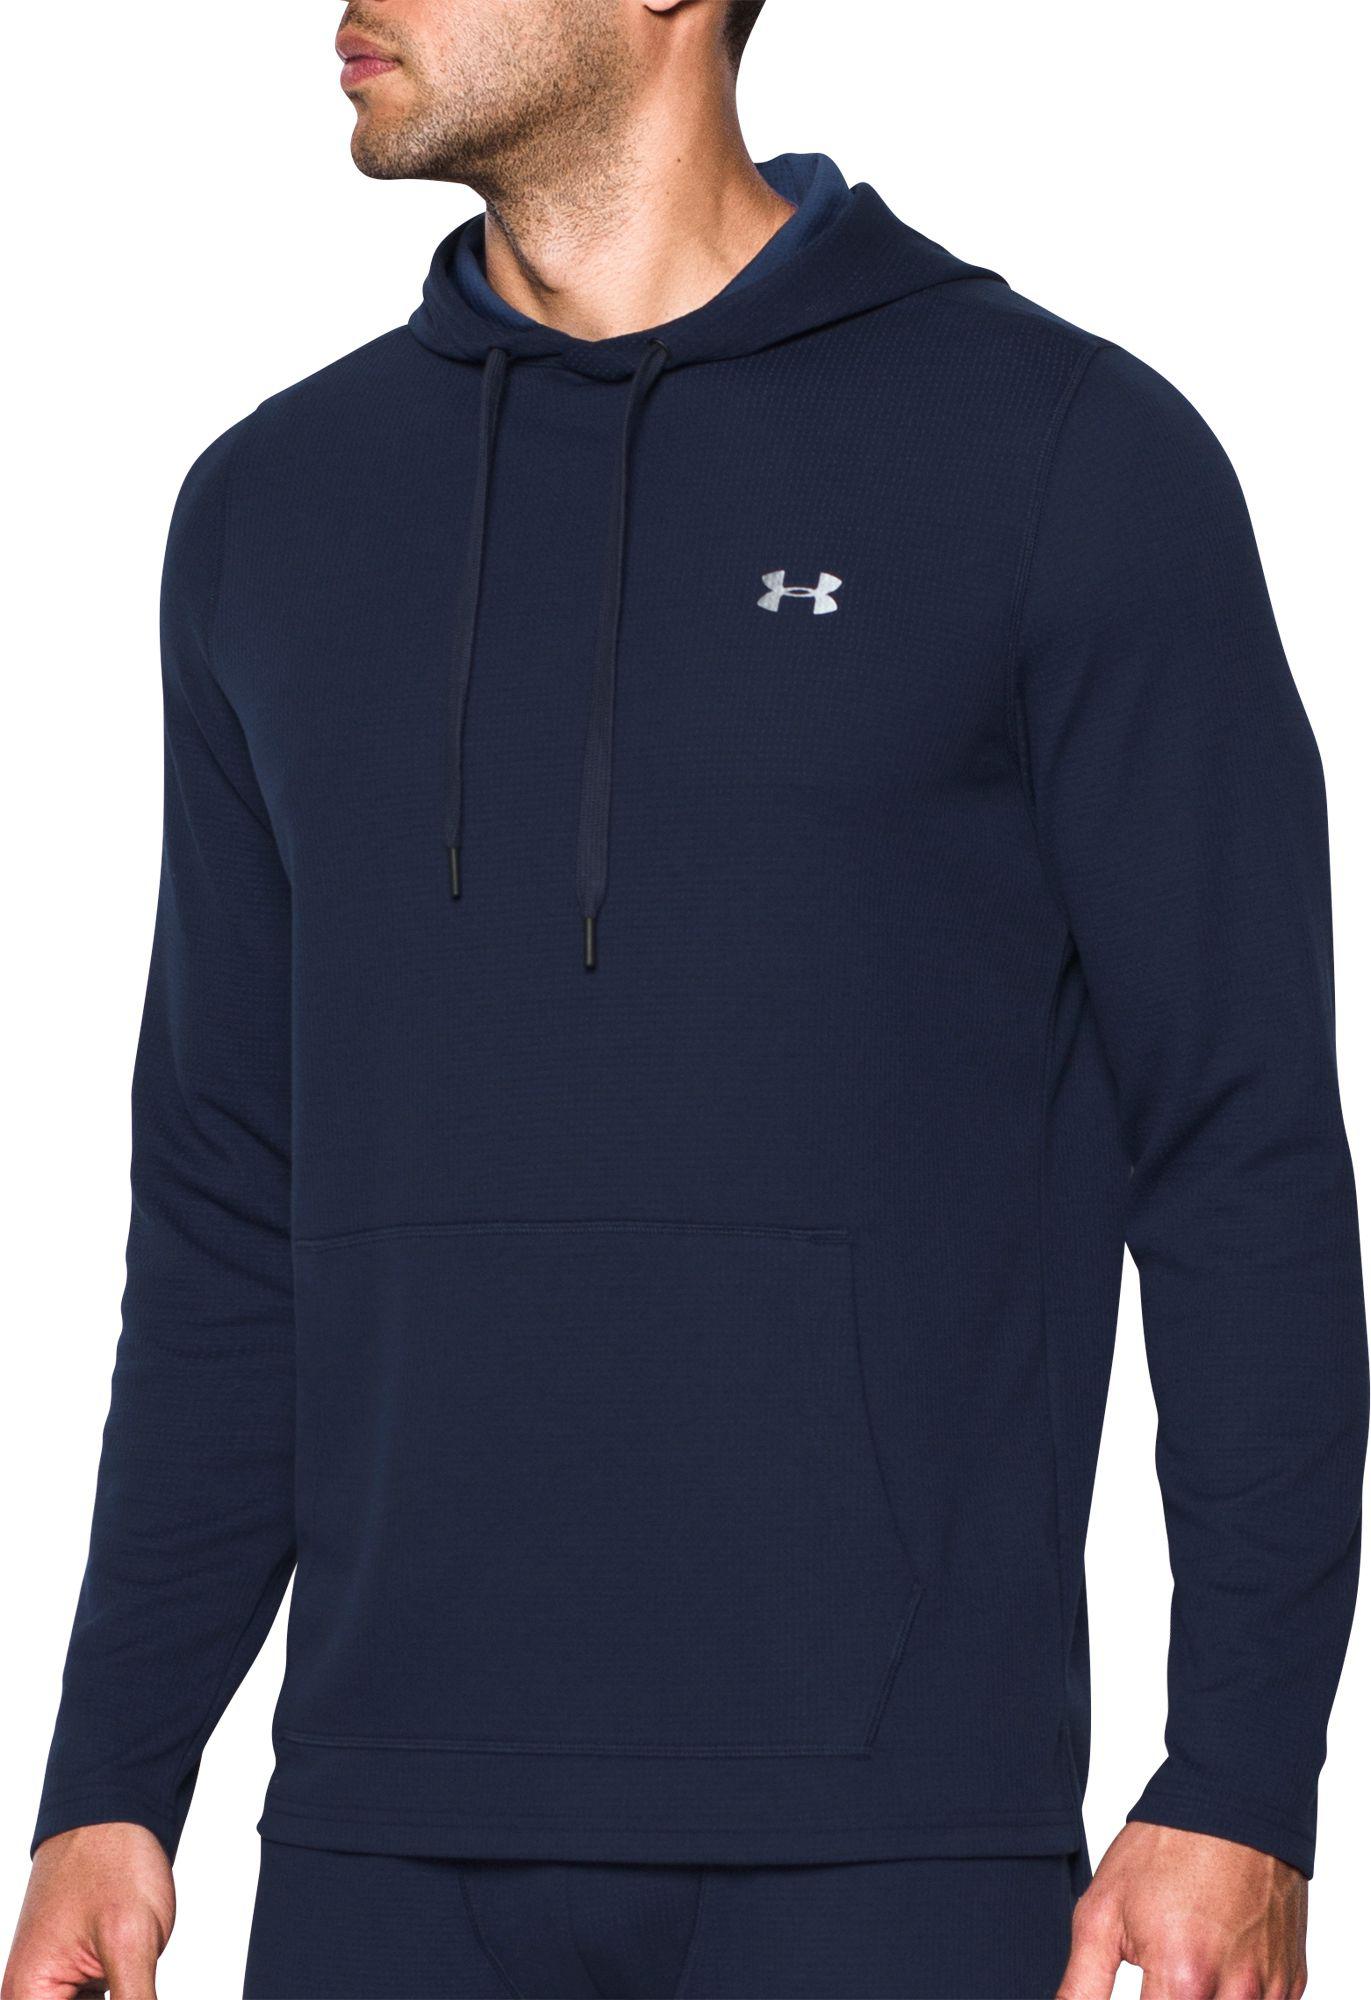 Navy Blue Under Armour Hoodie - almoire